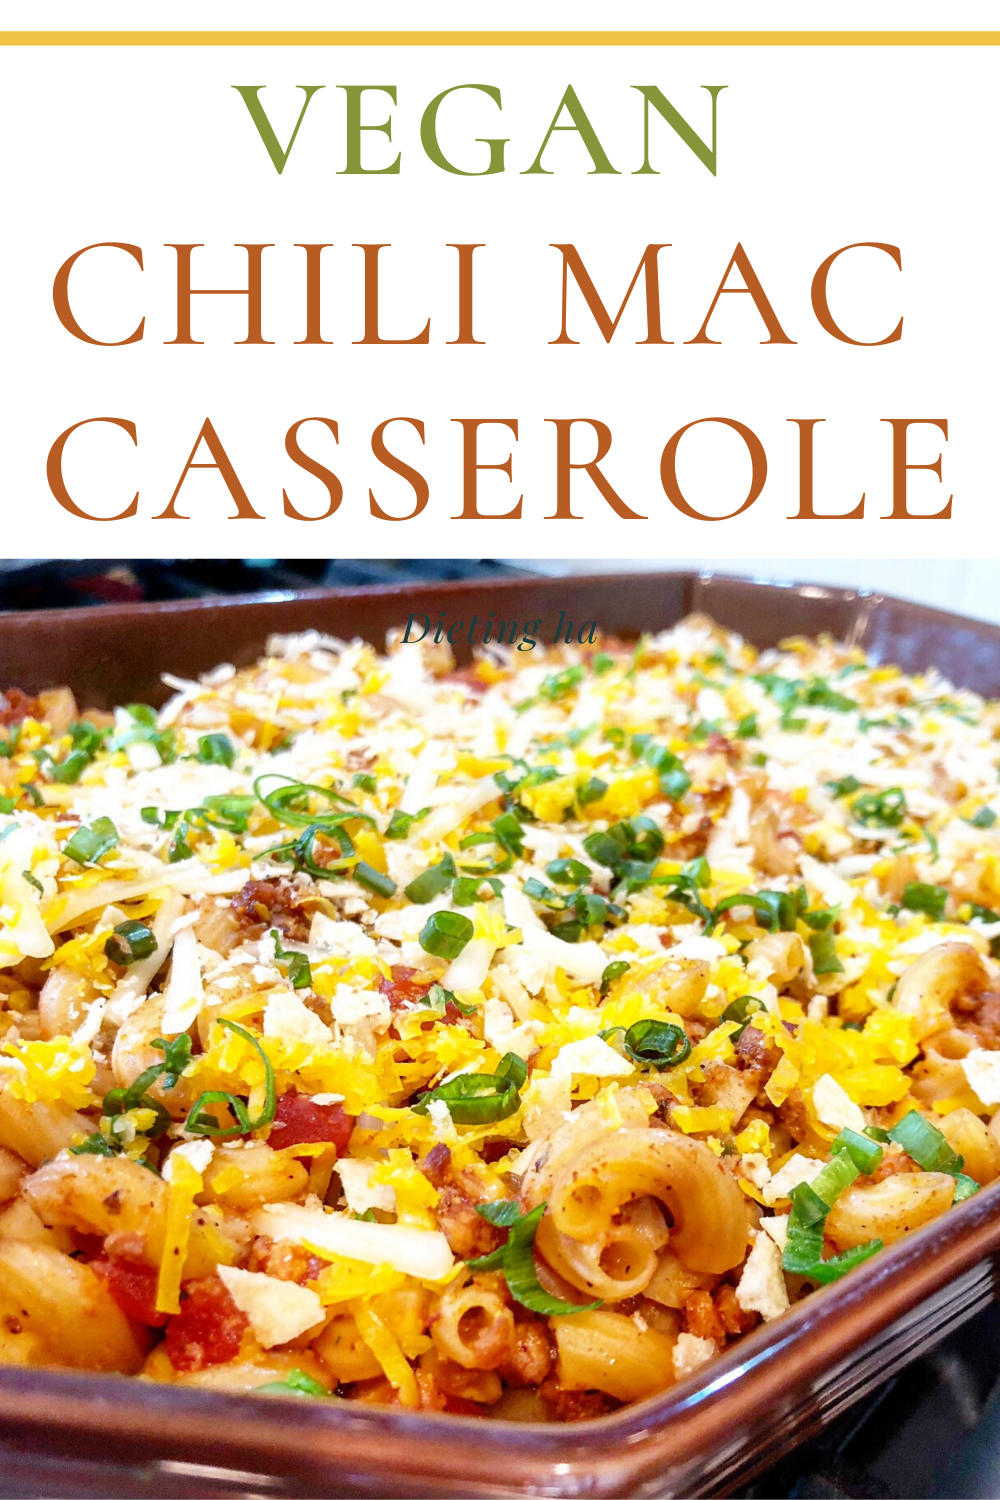 Vegan Chili Mac Casserole - A classic chili mac made with all plant-based ingredients. This one is sure to become a family favorite!

#chilimac #easycasserolerecipe #veganrecipe #plantbasedrecipe #thiswifecooksrecipes via @thiswifecooks